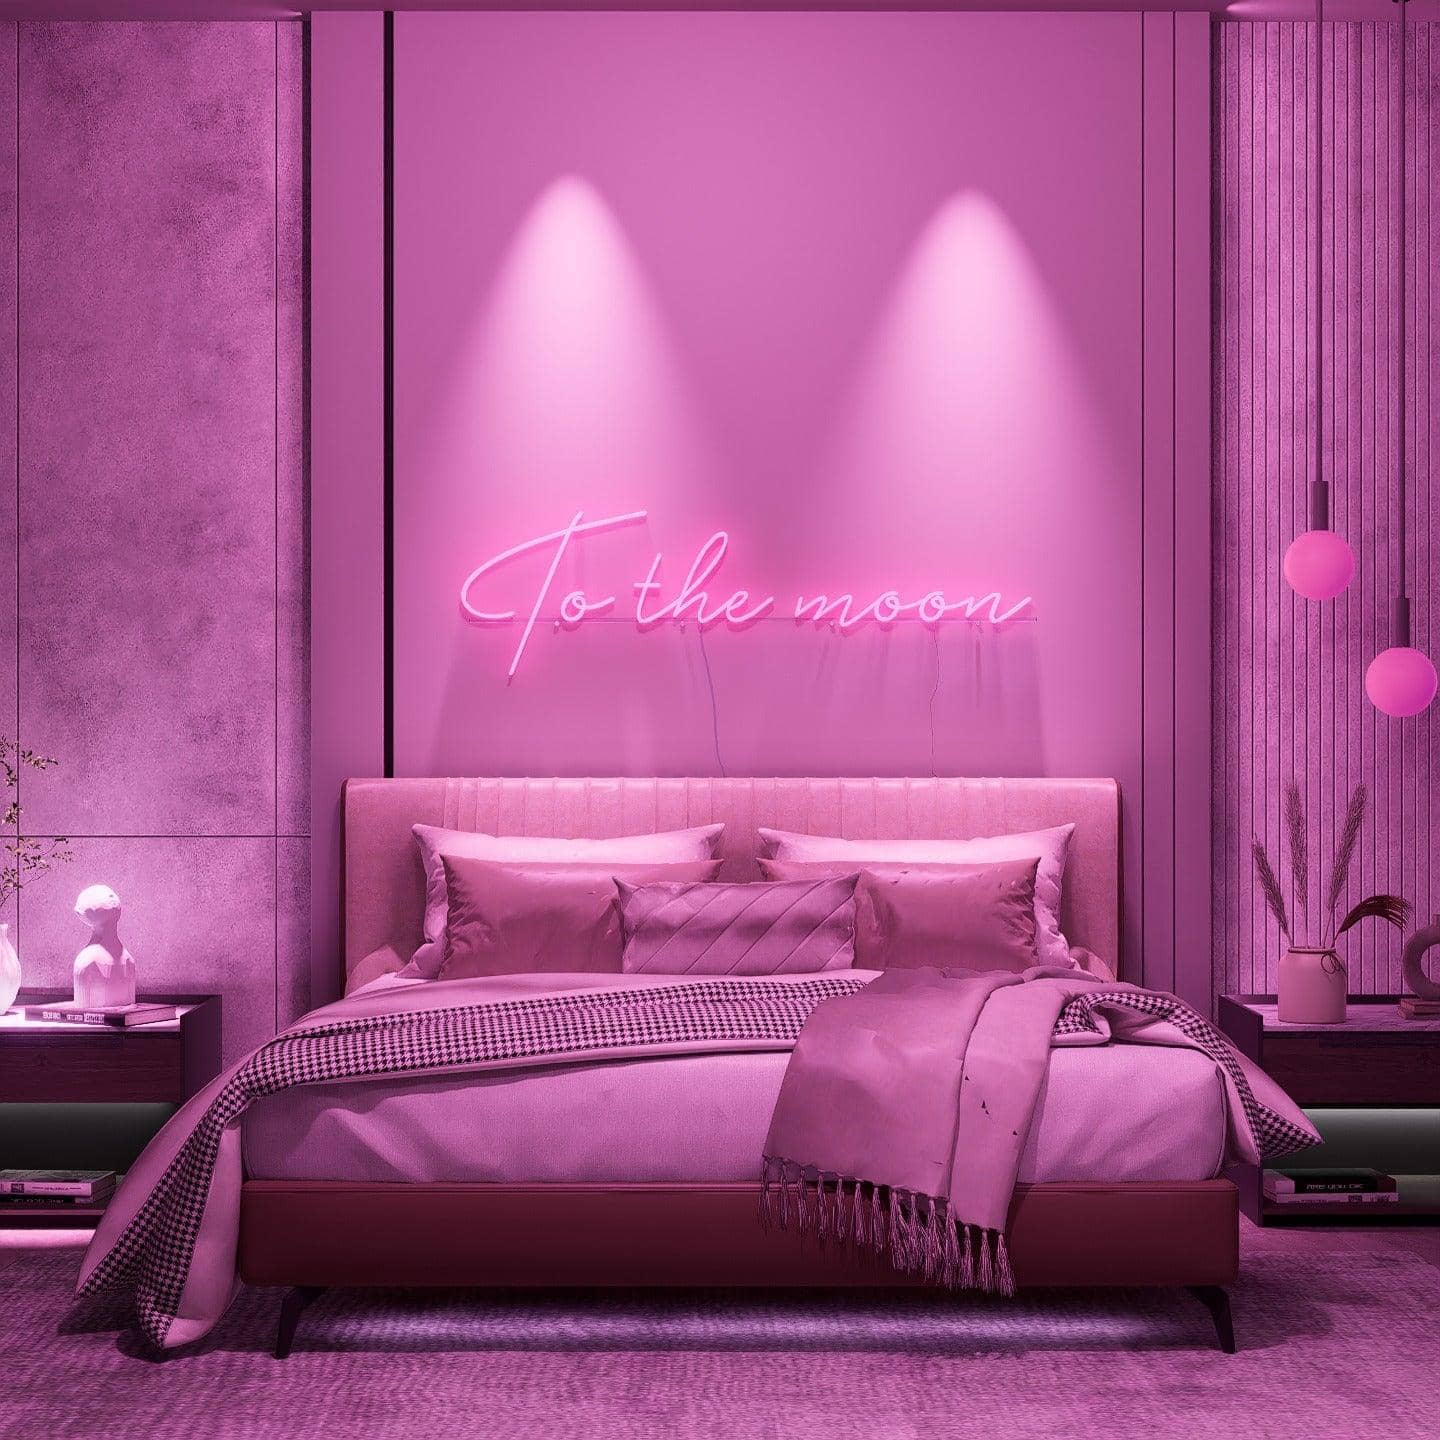 Light up pink neon lights hanging on the bedroom at night-to the moon